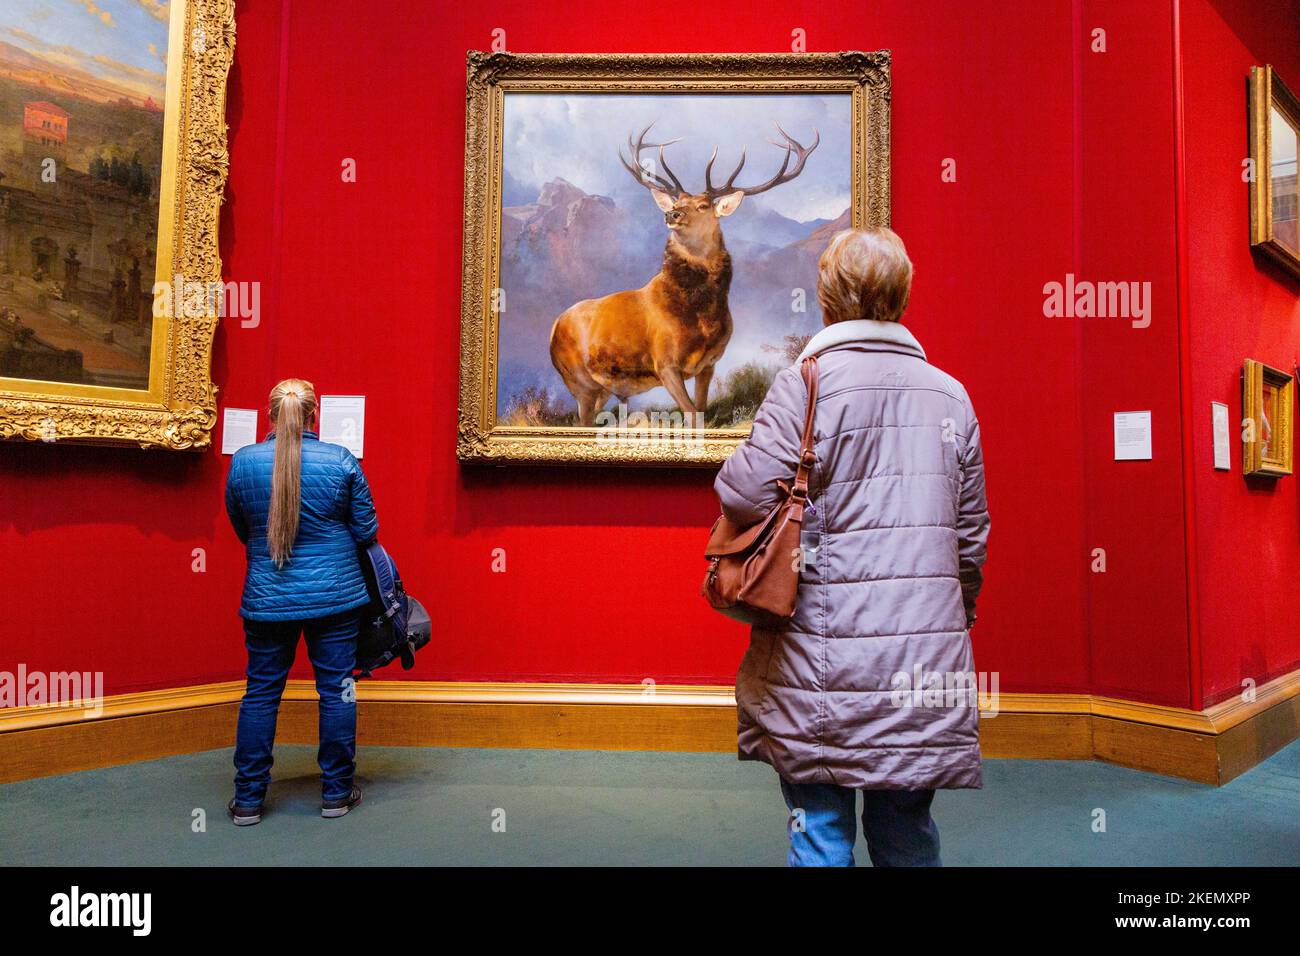 The Monarch of the Glen, 1851, Painting by Sir Edwin Landseer at The Scottish National Gallery, Edinburgh, Scotland, United Kingdom. Stock Photo